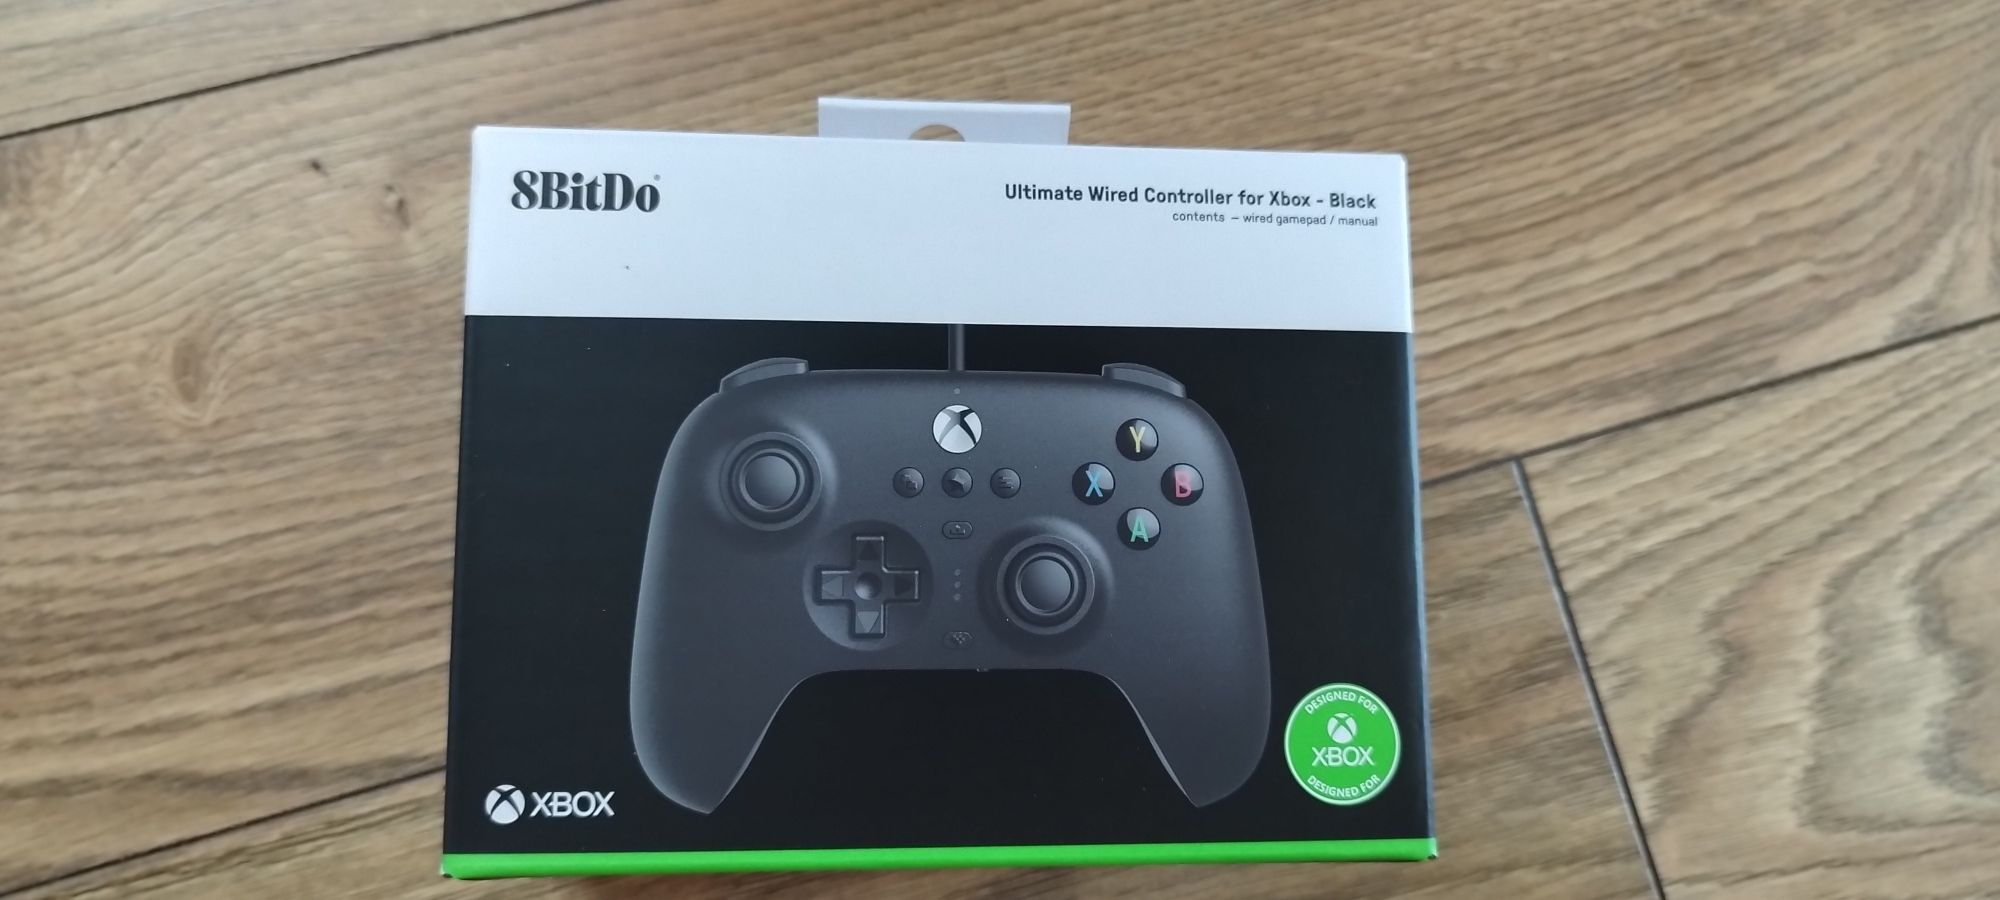 Геймпад 8BitDo Ultimate Wired Controller for Xbox 82CE Black